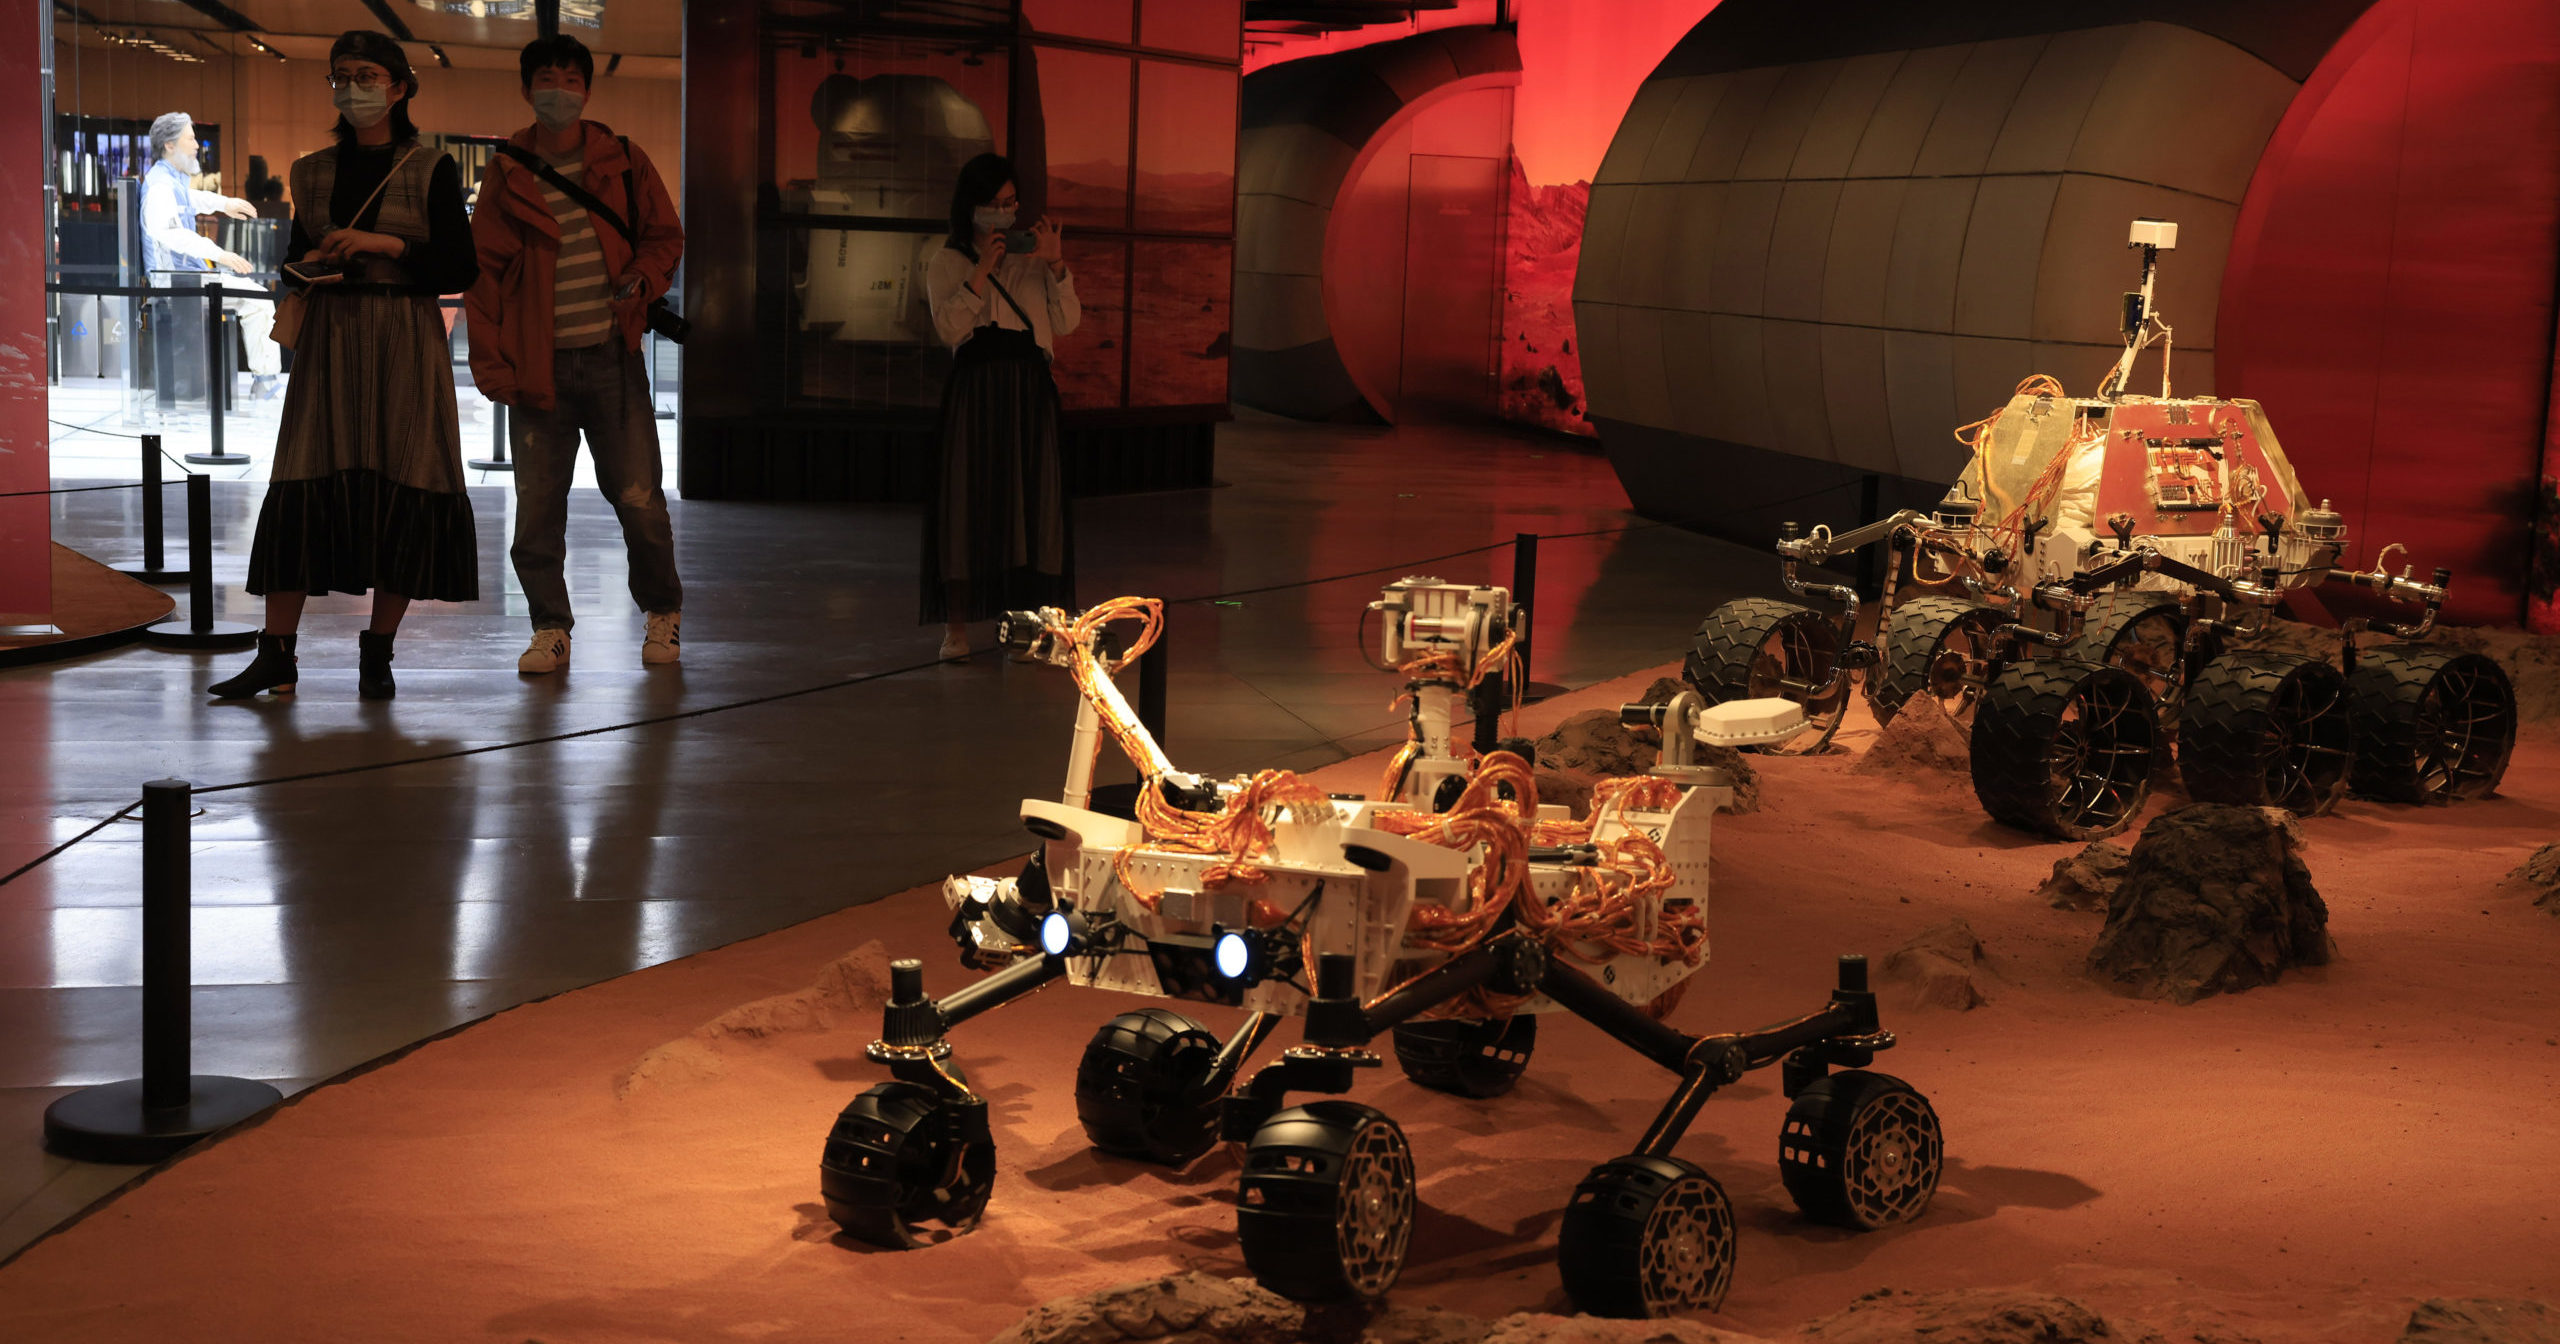 Visitors pass by an exhibition depicting rovers on Mars in Beijing on Friday